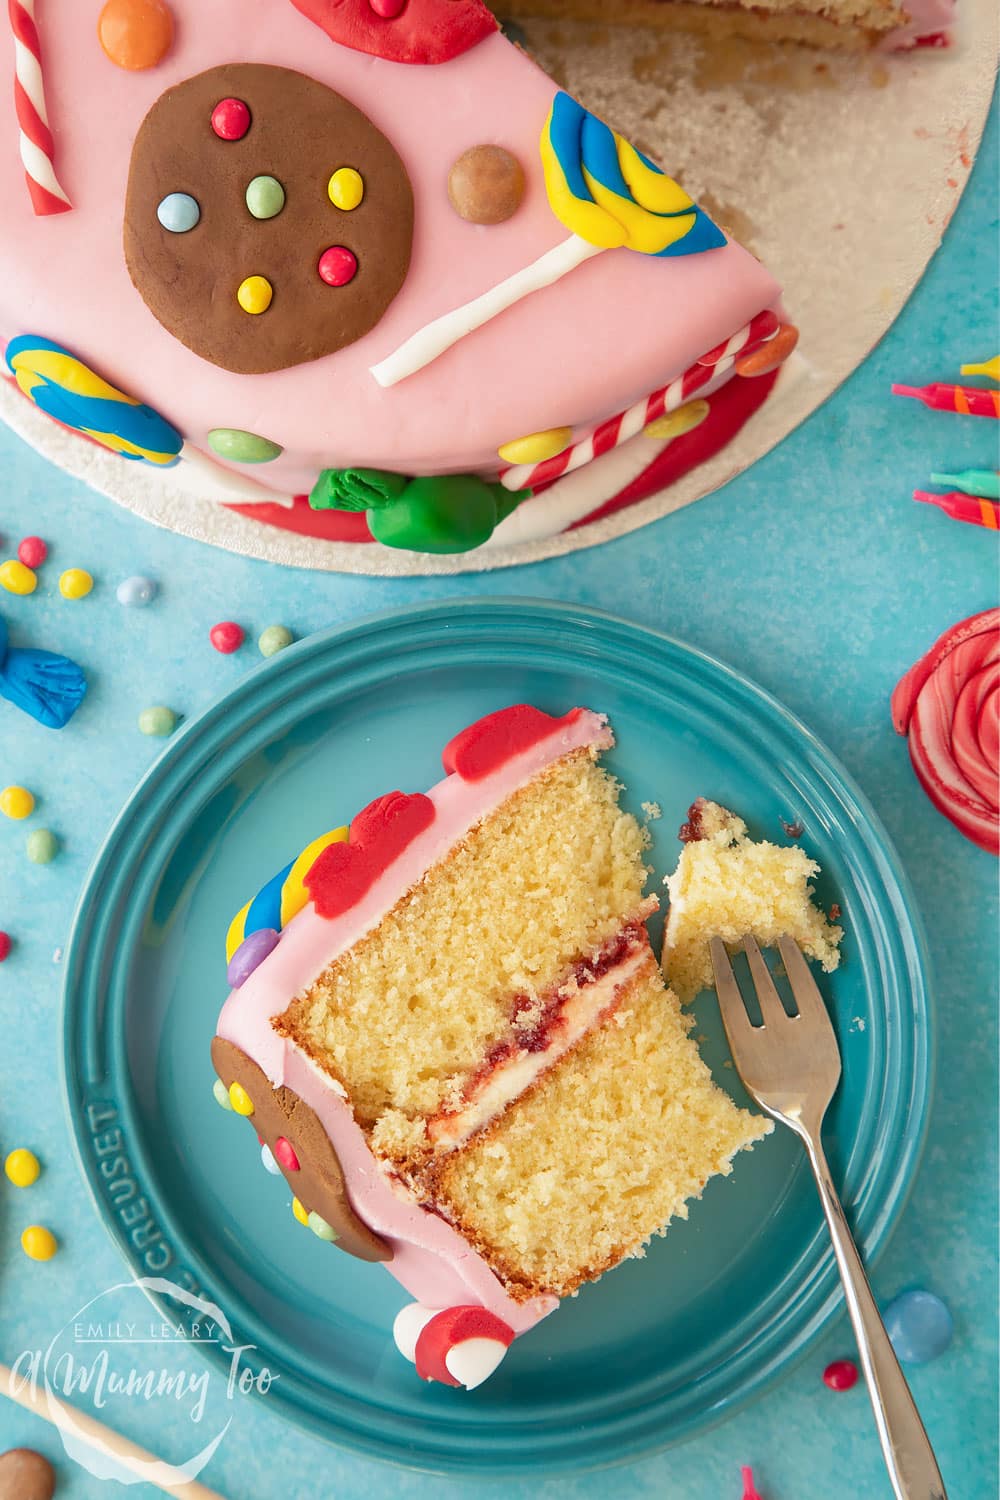 Sweet shop cake. A slice of Victoria sponge sandwich on a plate. The cake is covered with pink fondant and decorated with sugar paste candy sweets